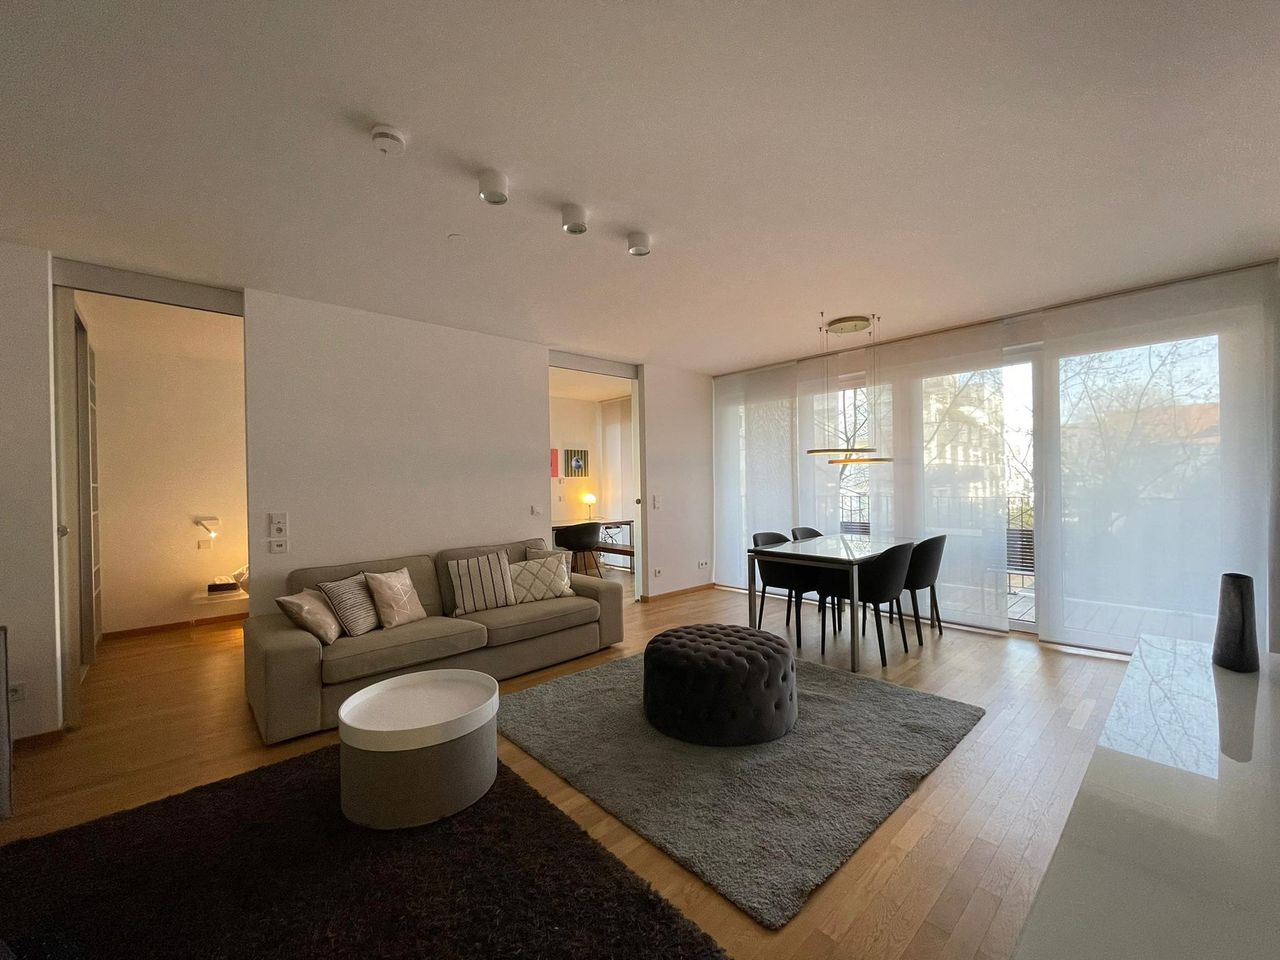 Luxury 1-bedroom apartment in the heart of Munich